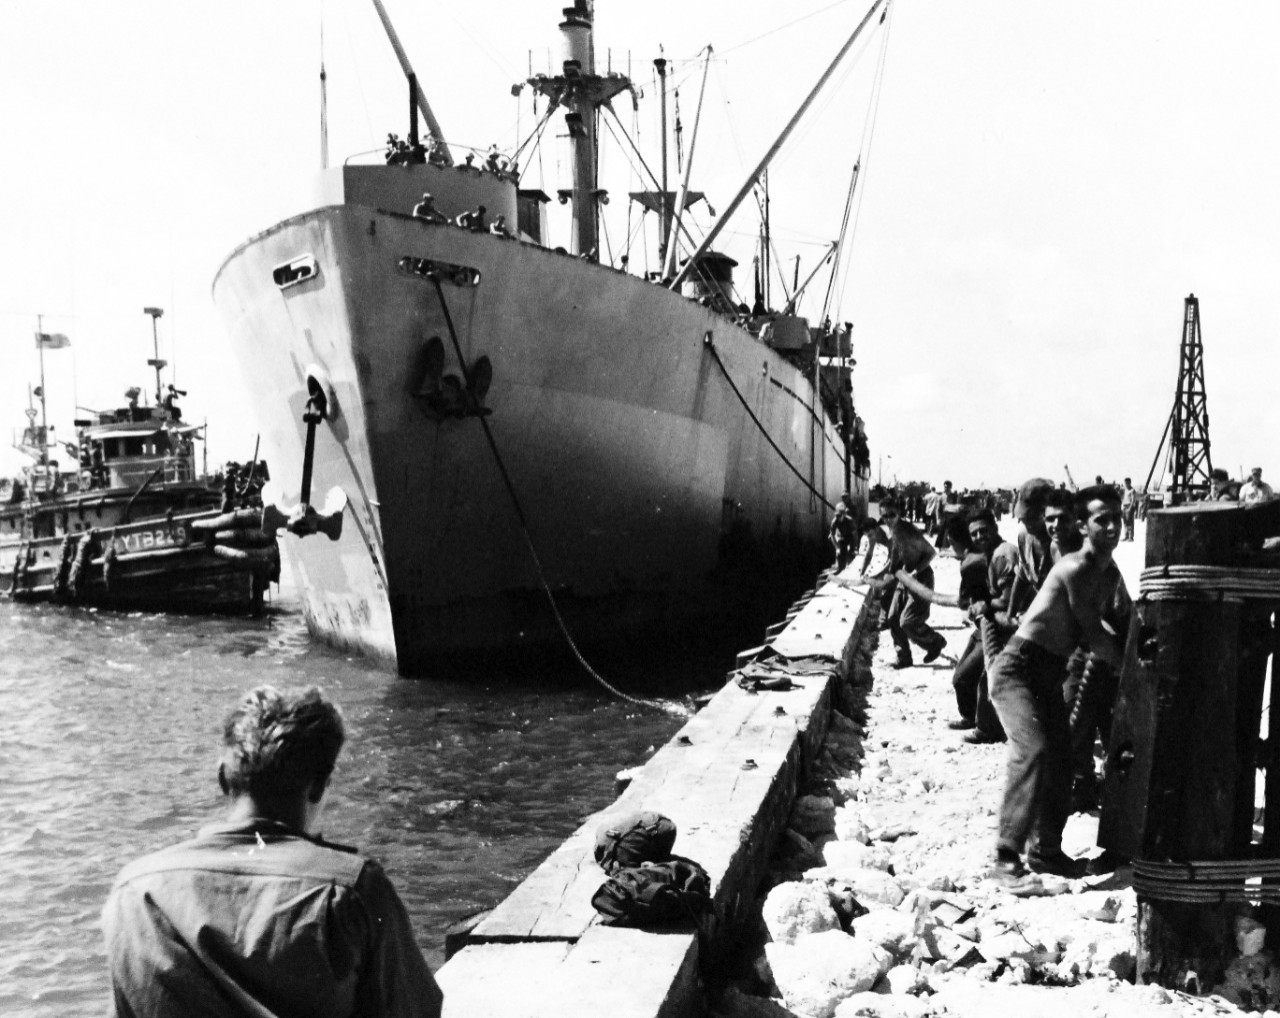 80-G-349316:   Okinawa Campaign, Landing, April 1945.    SS Sylvester Pattie, Liberty Ship, was the first large American vessel docked at Okinawa since the April 1st invasion.  It was docked at a new fire proof fuel pier which had just been completed by the 7th Seabees in Buckner Bay, off Katchin Hanto, Okinawa.  Shown:  Navy Seabees in the right foreground were about to secure a line to the three-pile mooring ballard immediately in front of them.  Aft, a similar line was secured to 19-pile dolphin (mooring post) just off the outer end of the pier.  In the background, across the pier from the ship, a pile driver may be seen.  It had finished its final work, for this pier, in driving the piles for the dolphin.  Note USS YTB 229. Photograph released October 22, 1945. Official U.S. Navy photograph, now in the collections of the National Archives.  (2015/12/22)